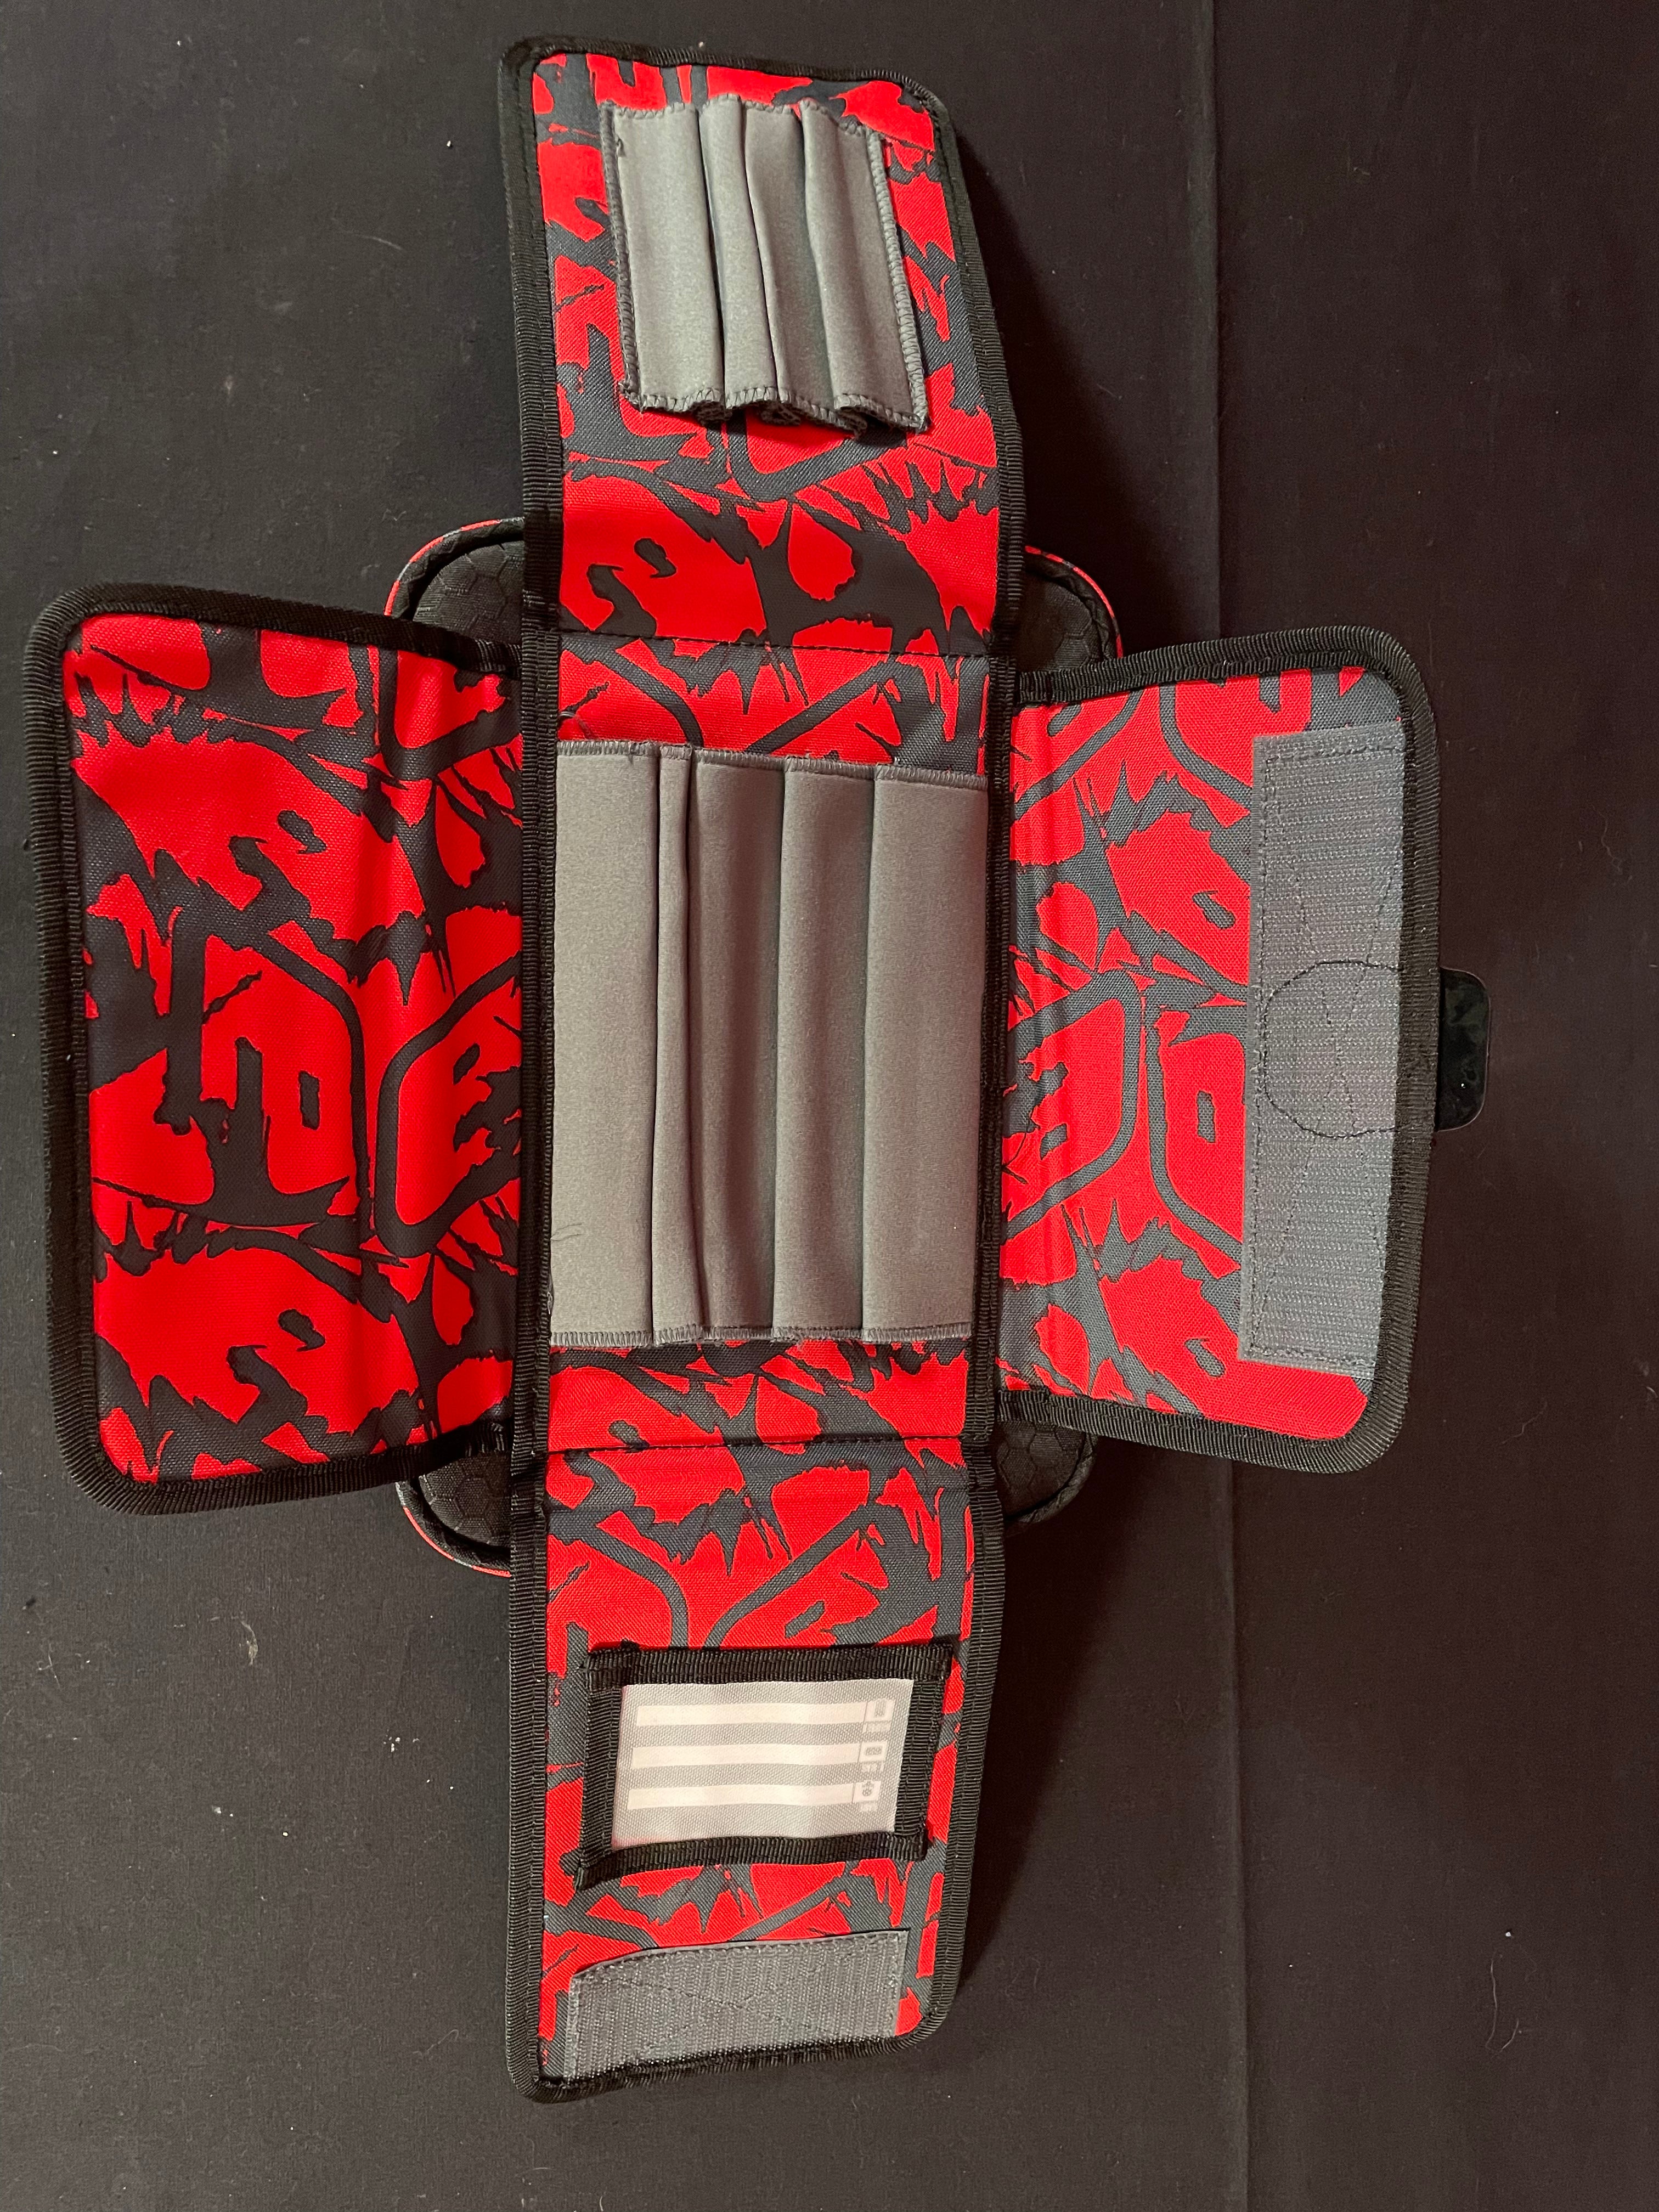 Used Planet Eclipse Marker Case - Red *No carrying strap*